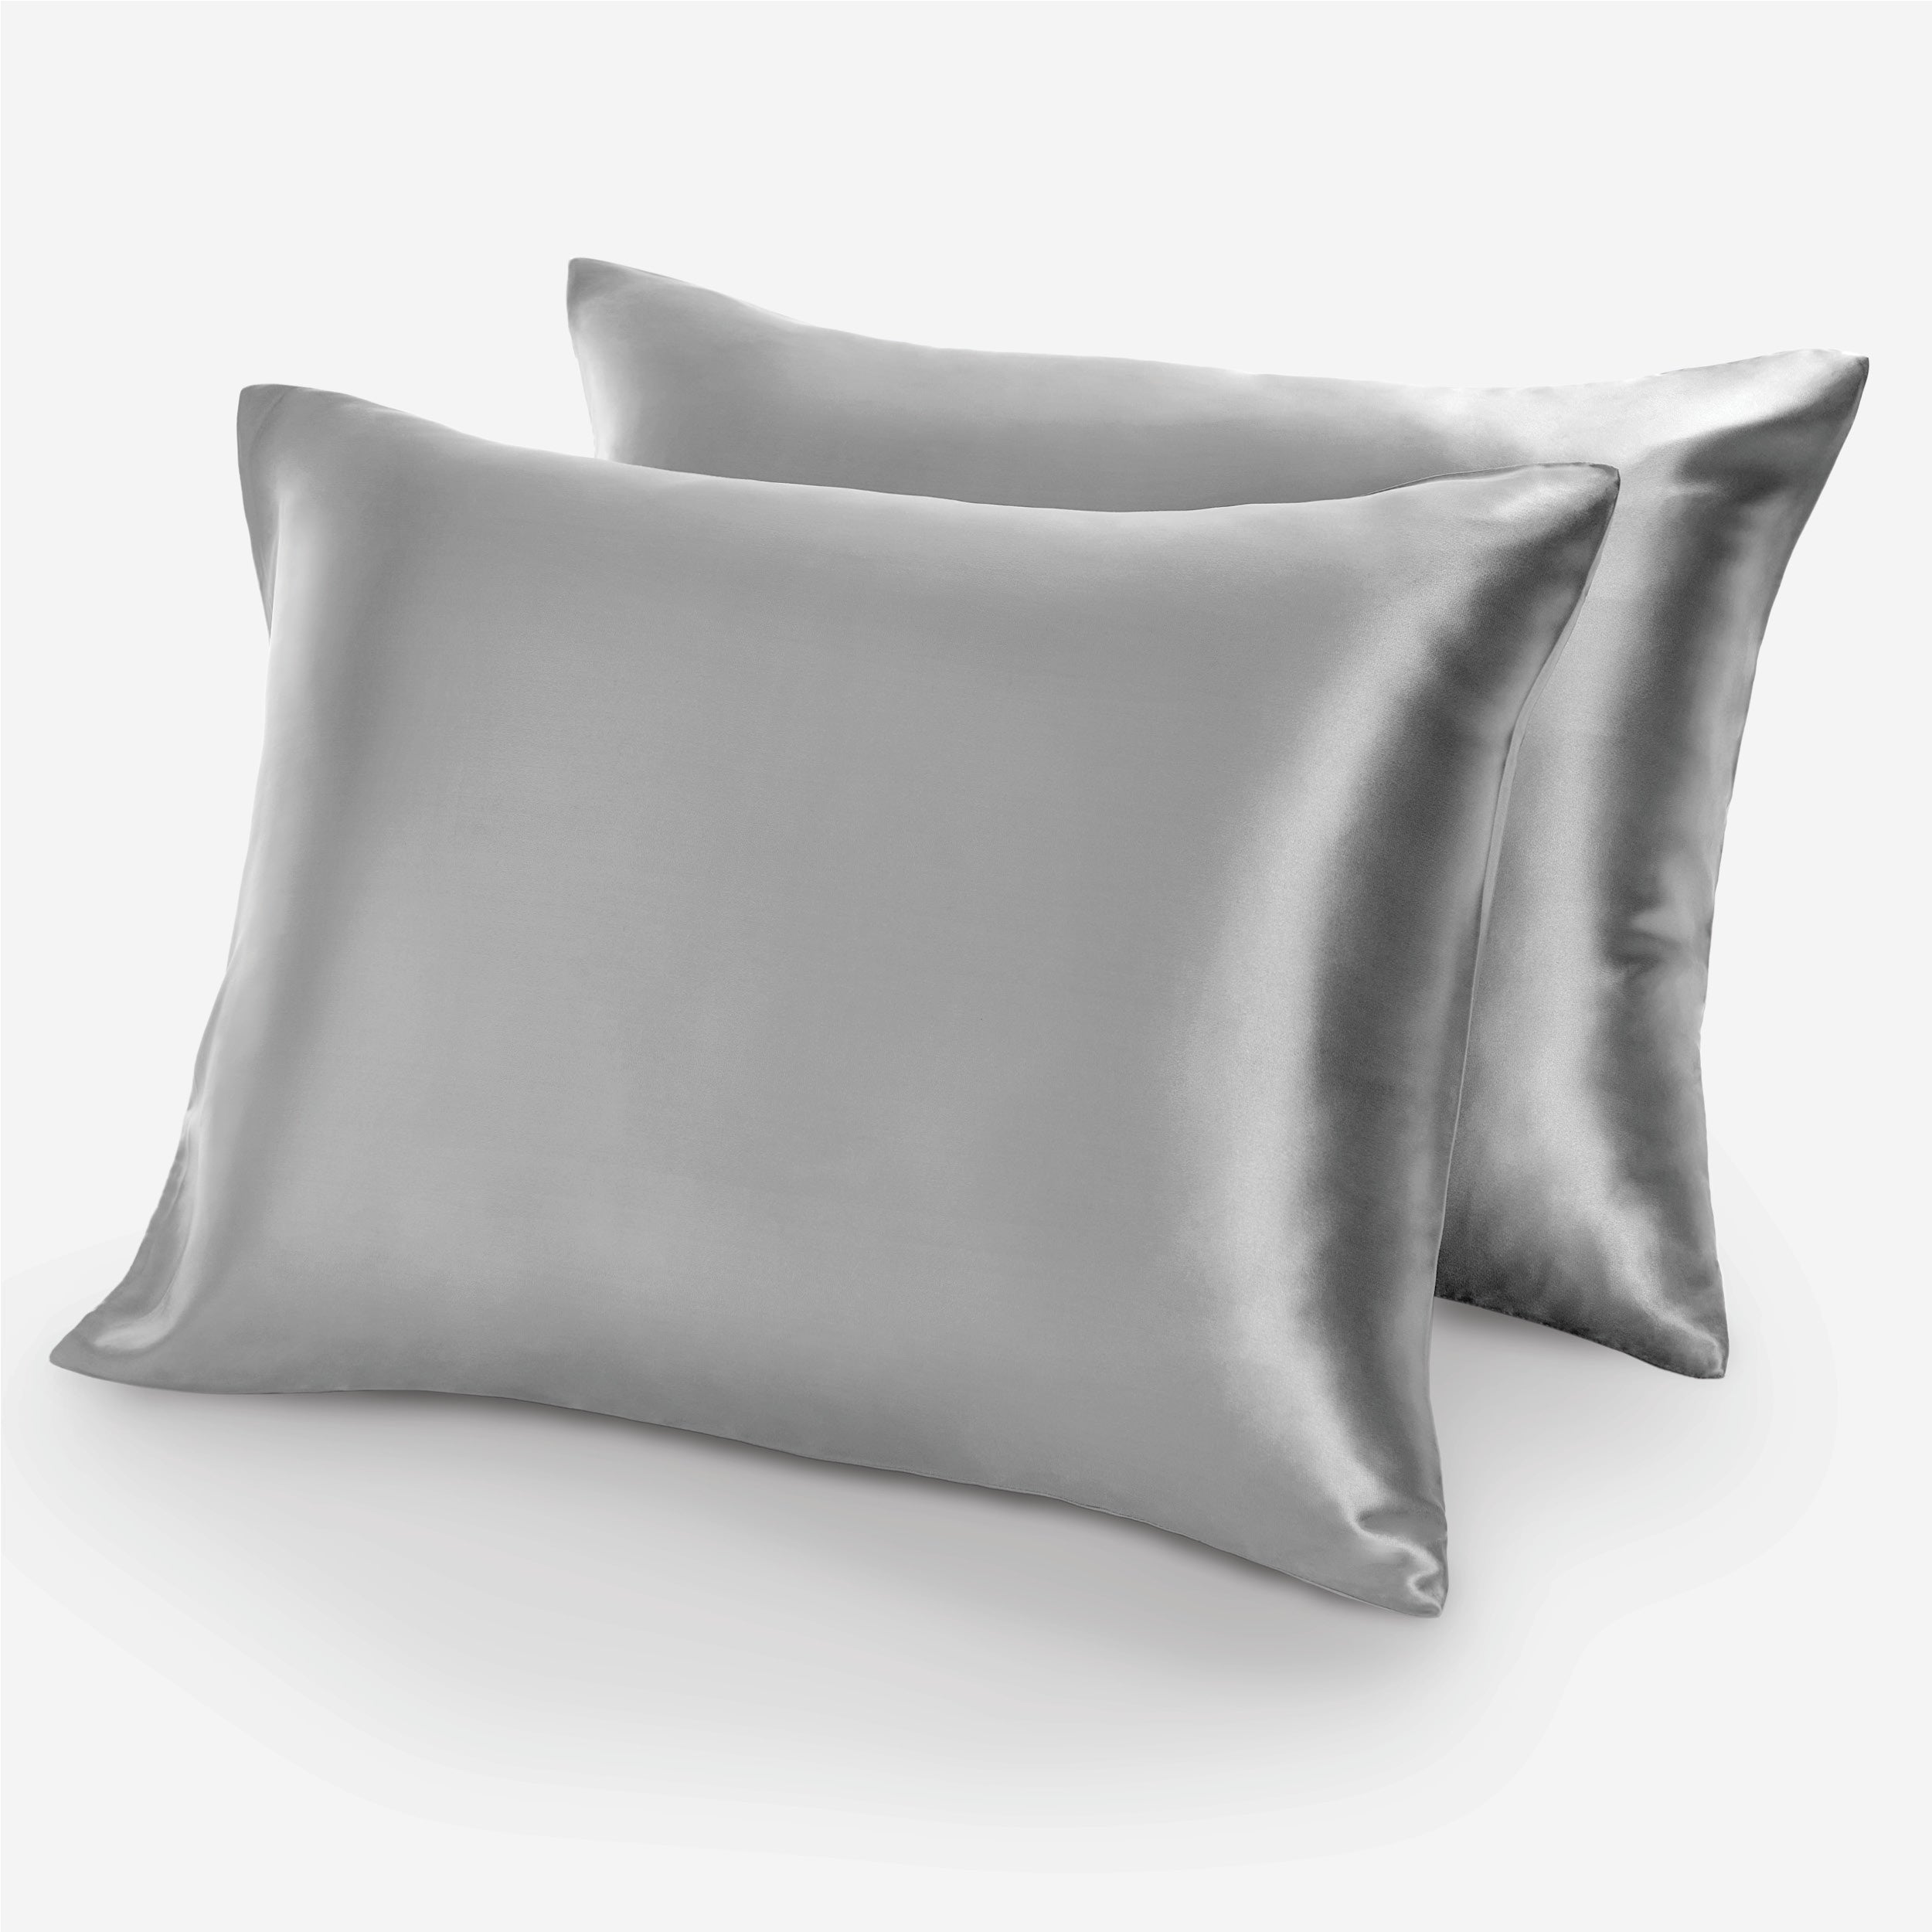 PS_Pillowcase_Silver_CategoryImage_c6036556-15ee-4bb8-903f-5c5a561d3af6.jpg